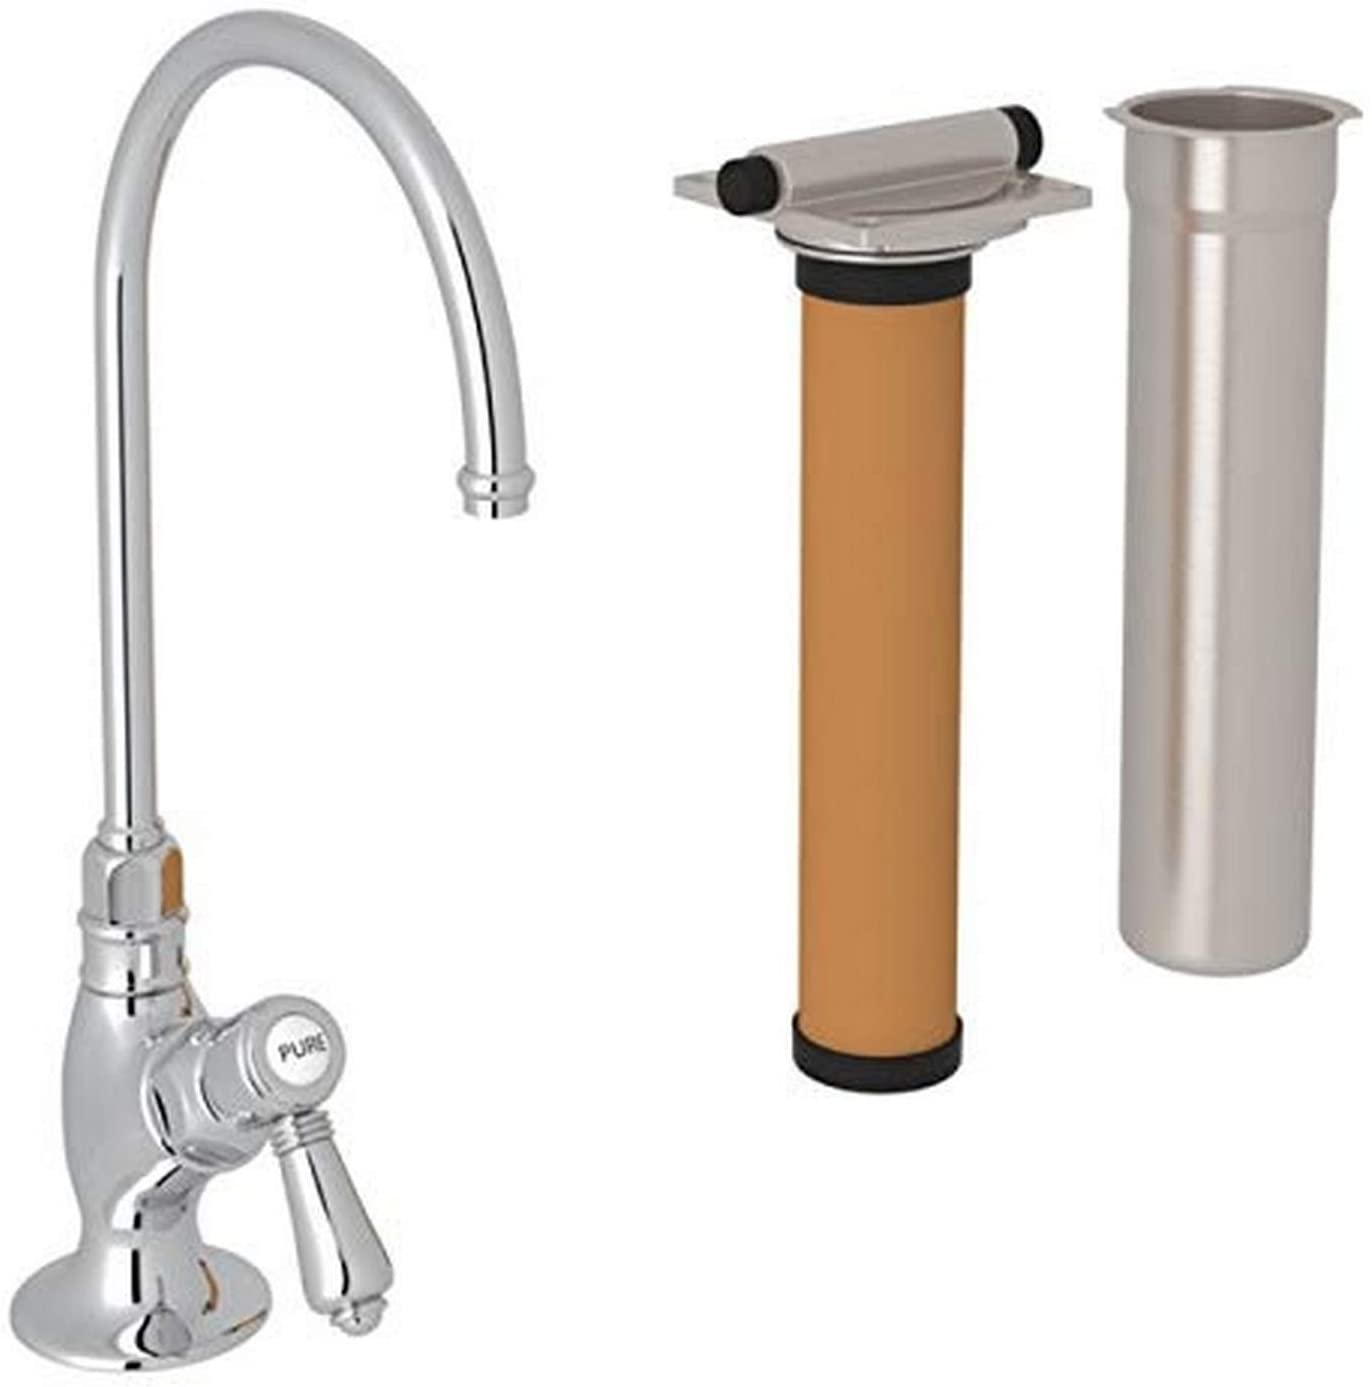 Perrin & Rowe Filtration Faucet & Filter in Polished Chrome w/Lever Handle